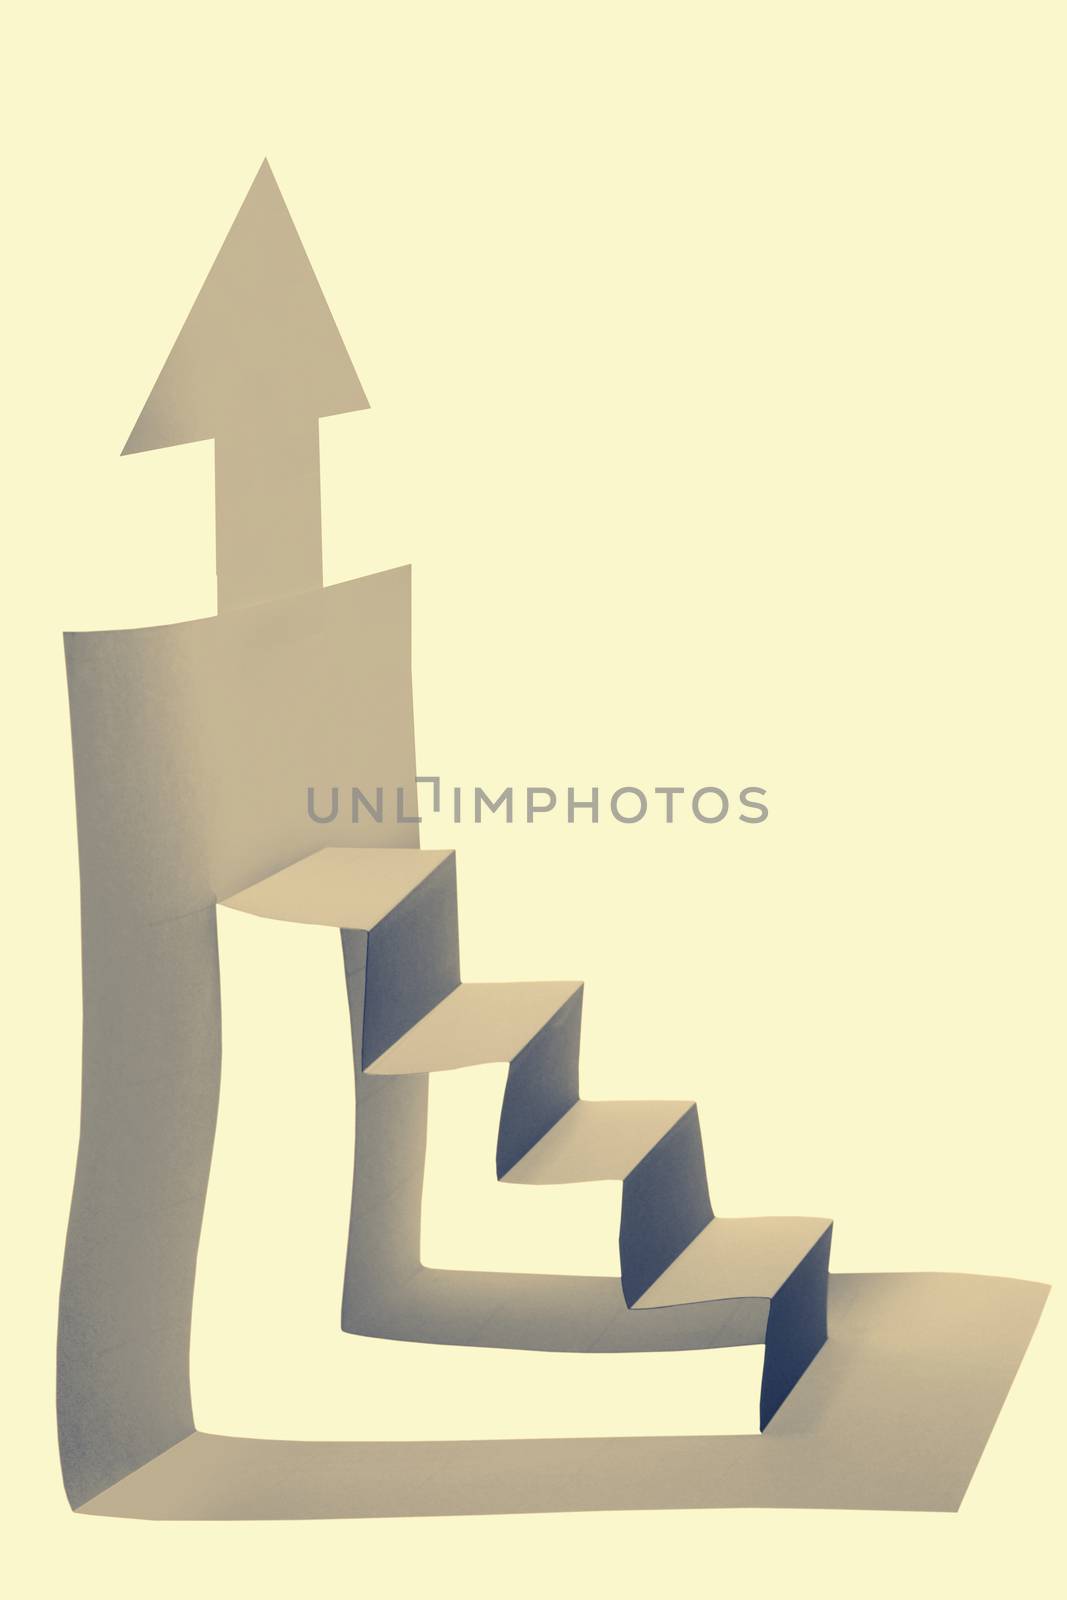 paper composition with stairs side view